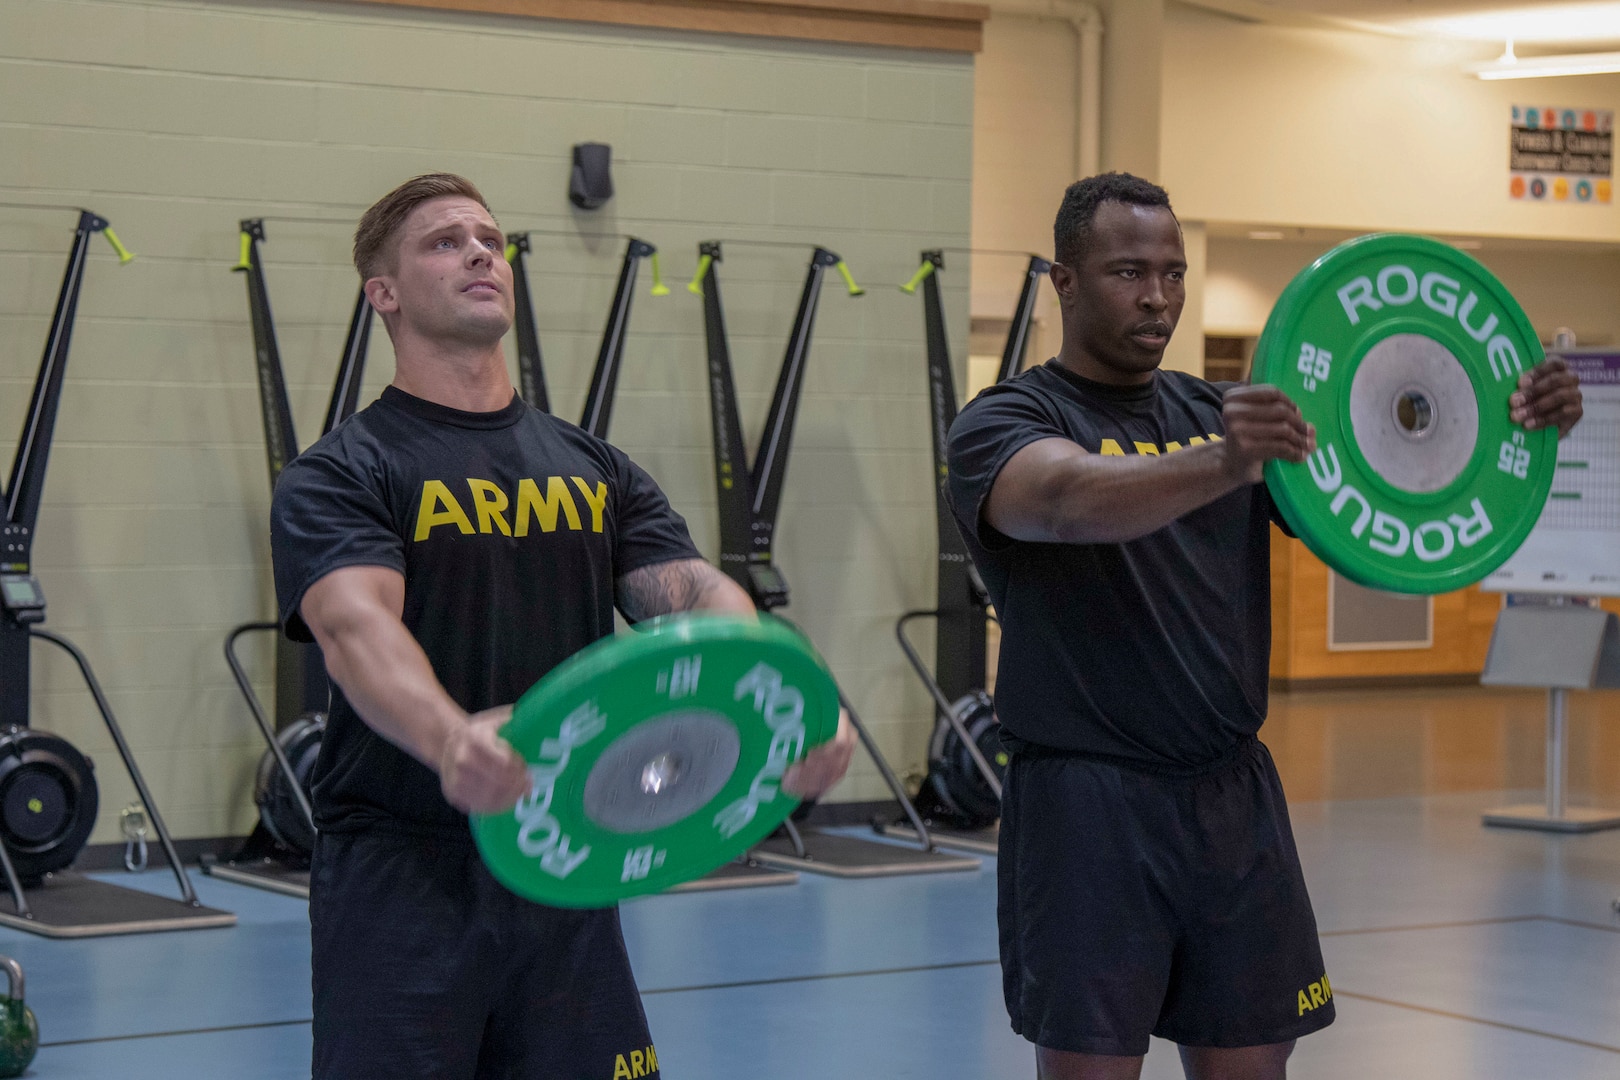 U.S. Army Staff Sgt. Andrew Estabrook, left, 2nd Brigade, 377th Parachute Field Artillery Regiment, and Alaska Army National Guard 2nd Lt. Innocent Bennett, 297th Infantry Battalion, practice physical fitness training at Buckner Fitness Center on Joint Base Elmendorf-Richardson as part of the Master Fitness Trainer Course July 24, 2019. The MFTC trains selected Soldiers in all aspects of the Army's Physical Readiness Training system. Once qualified, the trainers advise Soldiers on physical readiness issues and monitor unit and individual physical readiness programs.